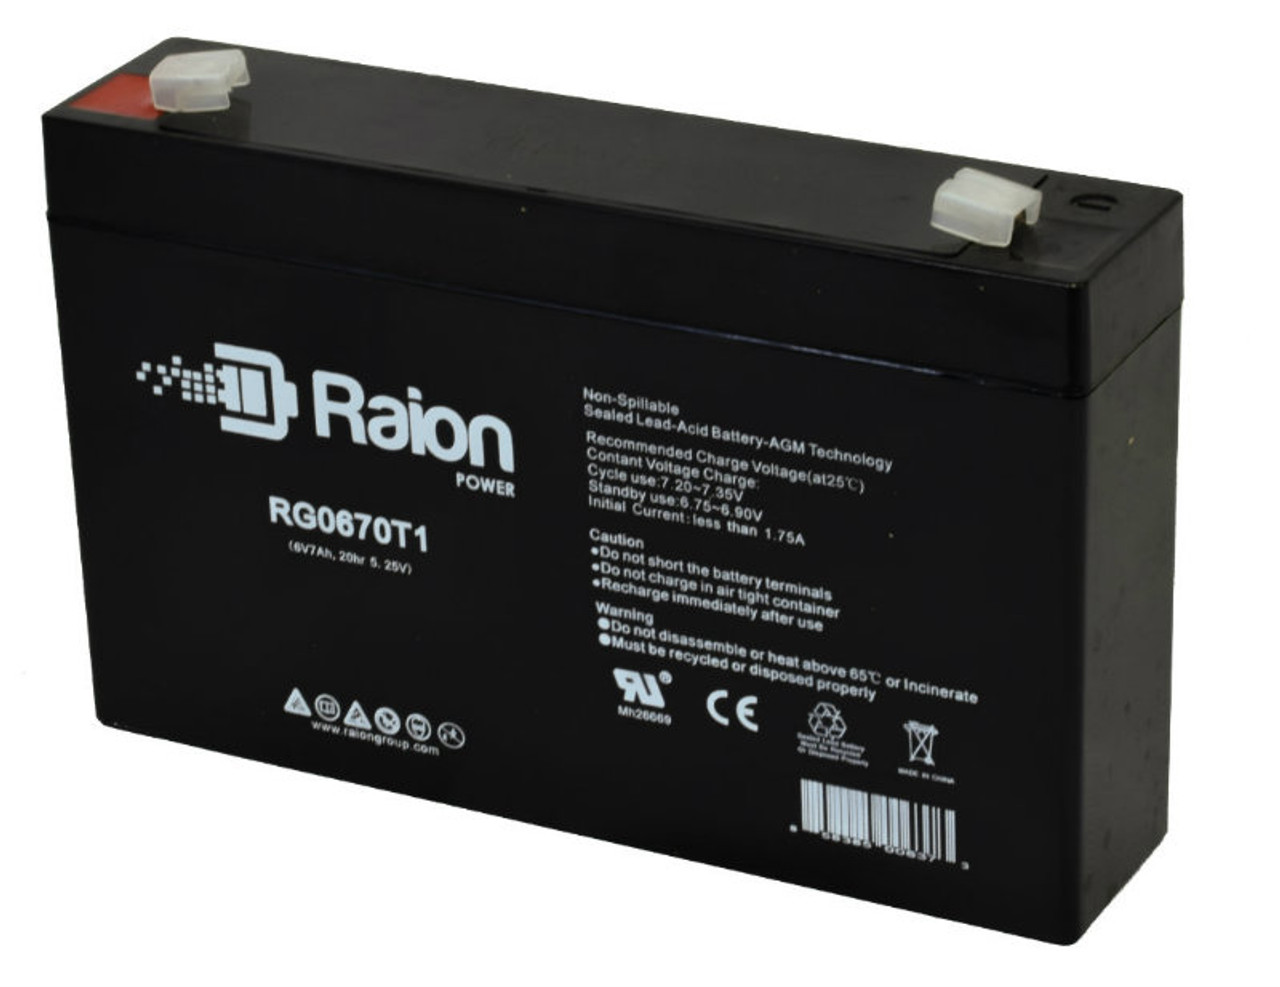 Raion Power RG0670T1 Replacement Battery for MK ES7-6 OEM Battery